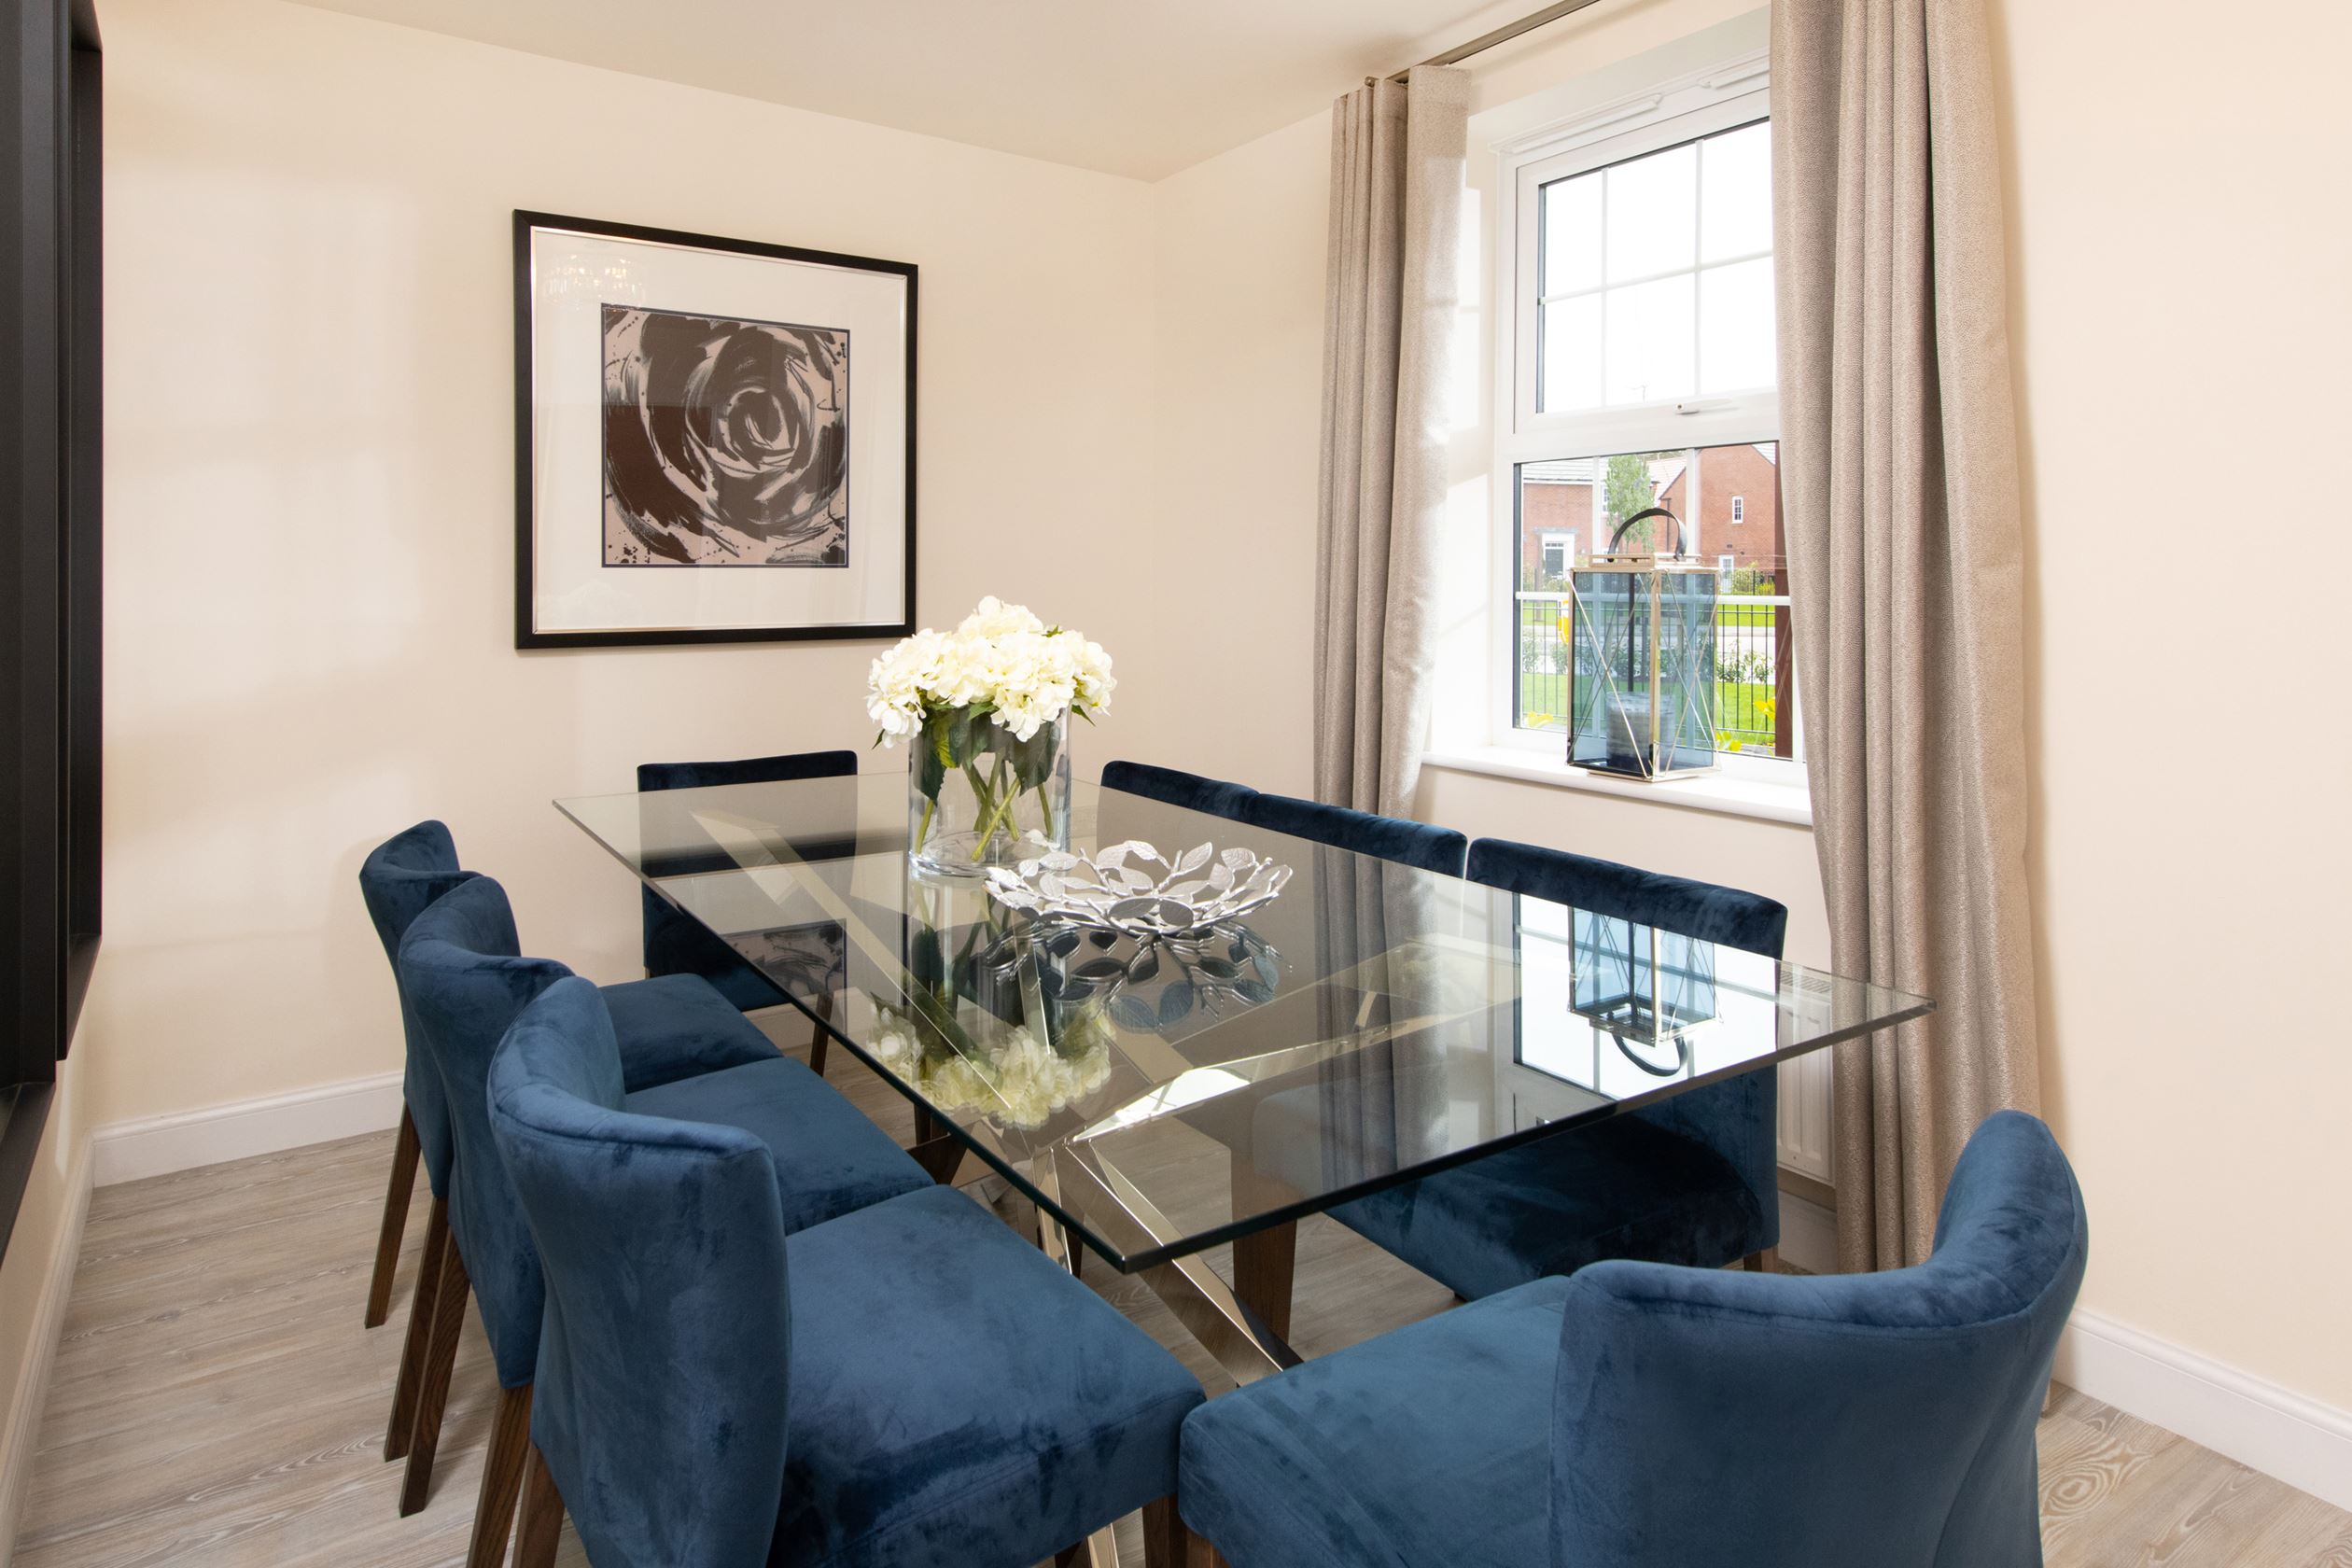 Property 3 of 9. Winstone Dining Room